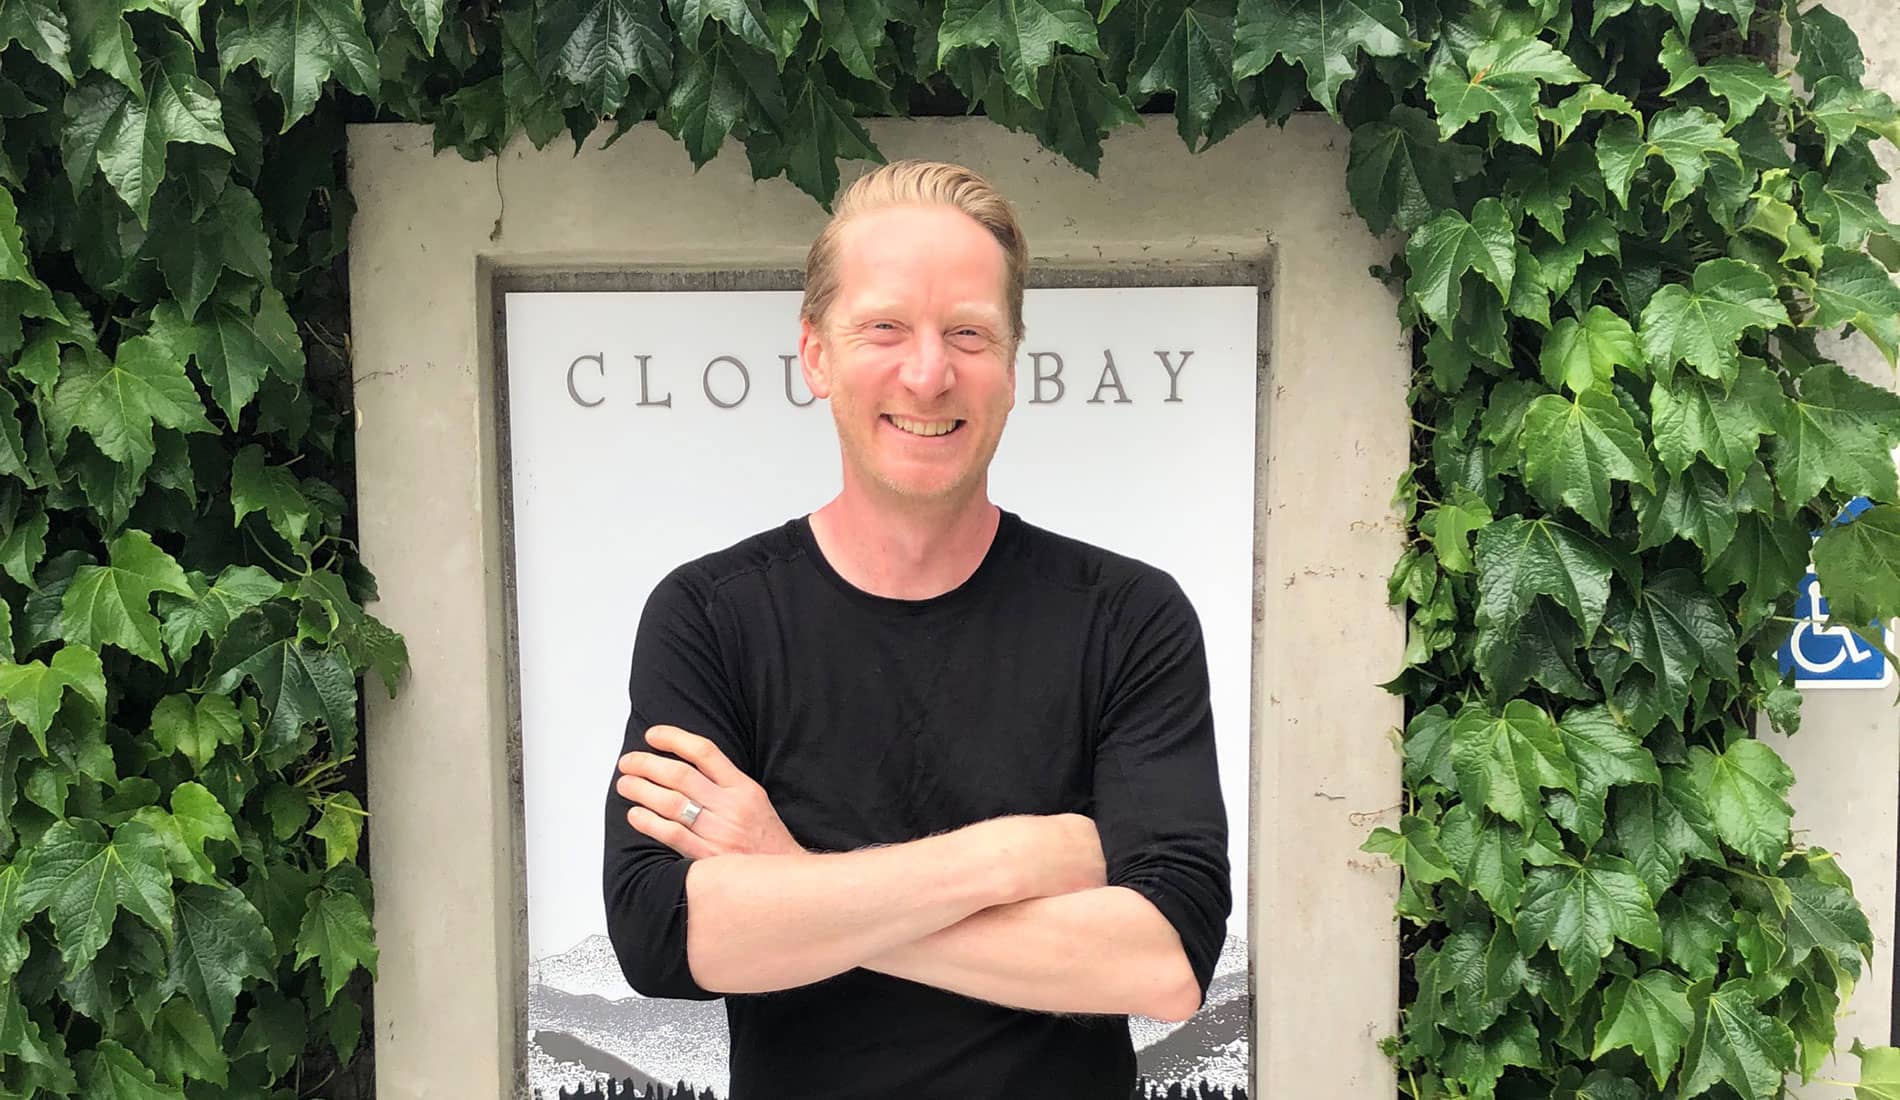 A man stands in front of the Cloudy Bay sign. His arms are folded and he is smiling.